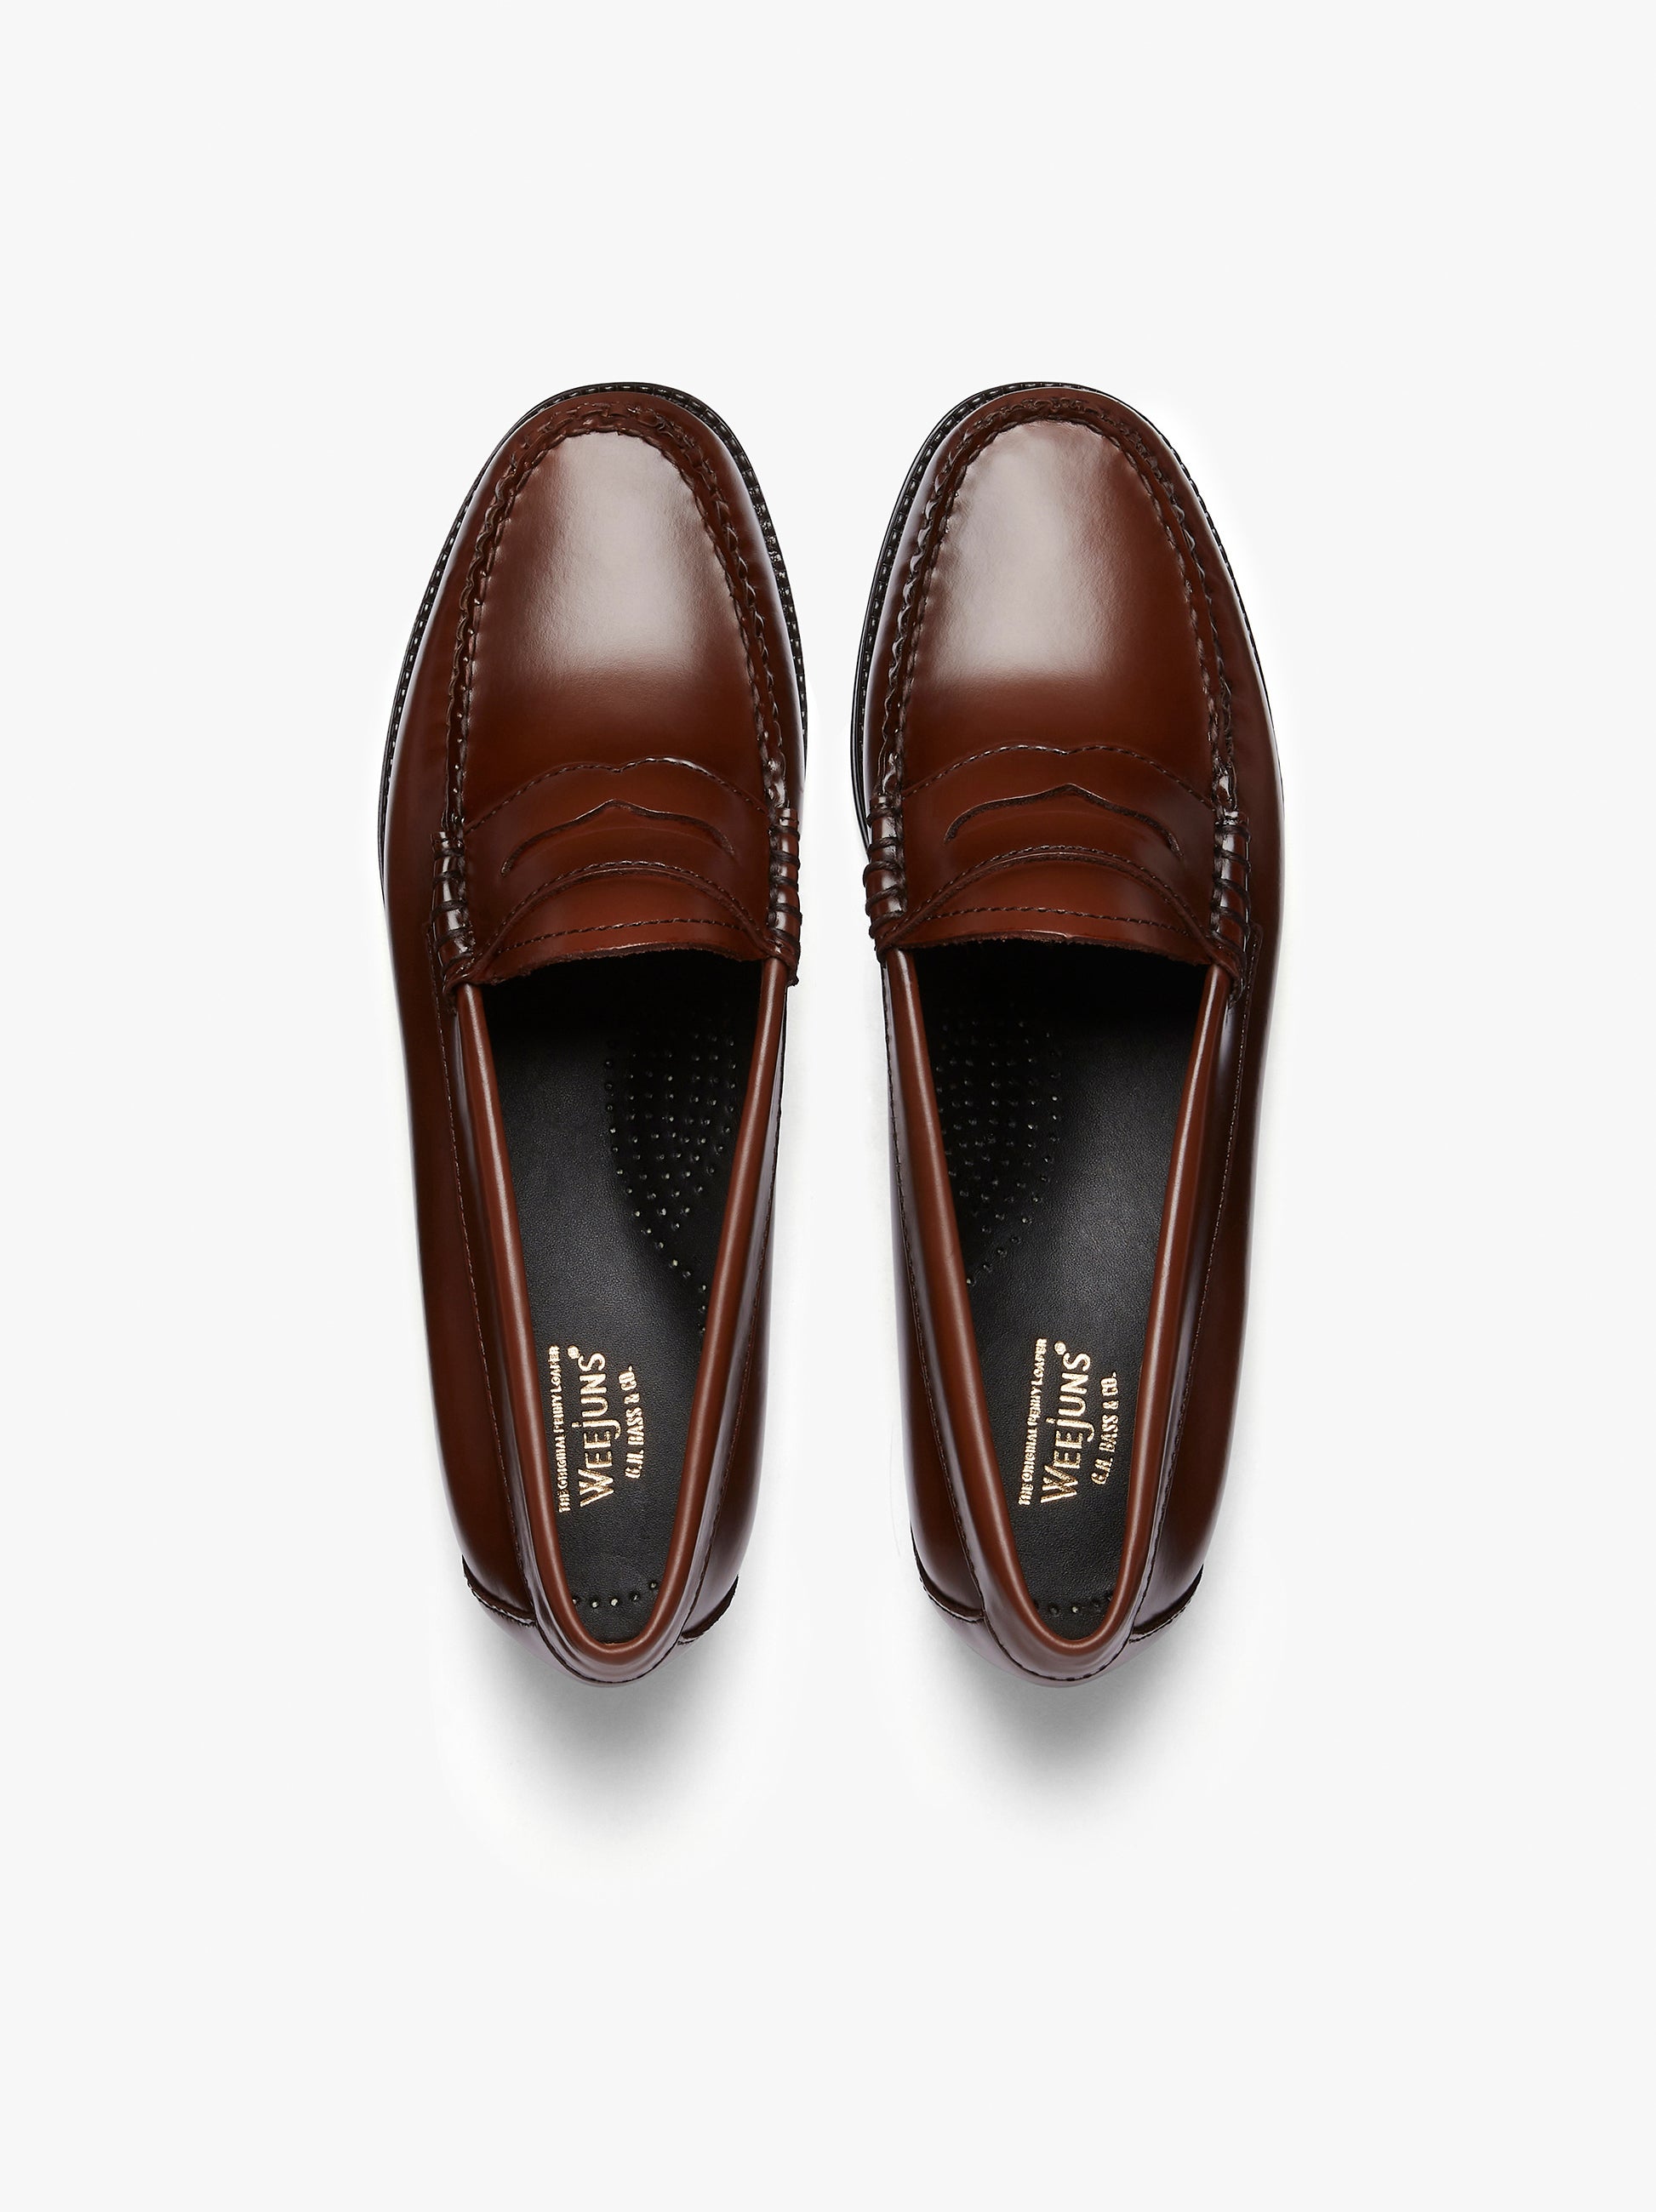 Cognac Loafers Womens | Easy Weejuns Penny Loafers – G.H.BASS